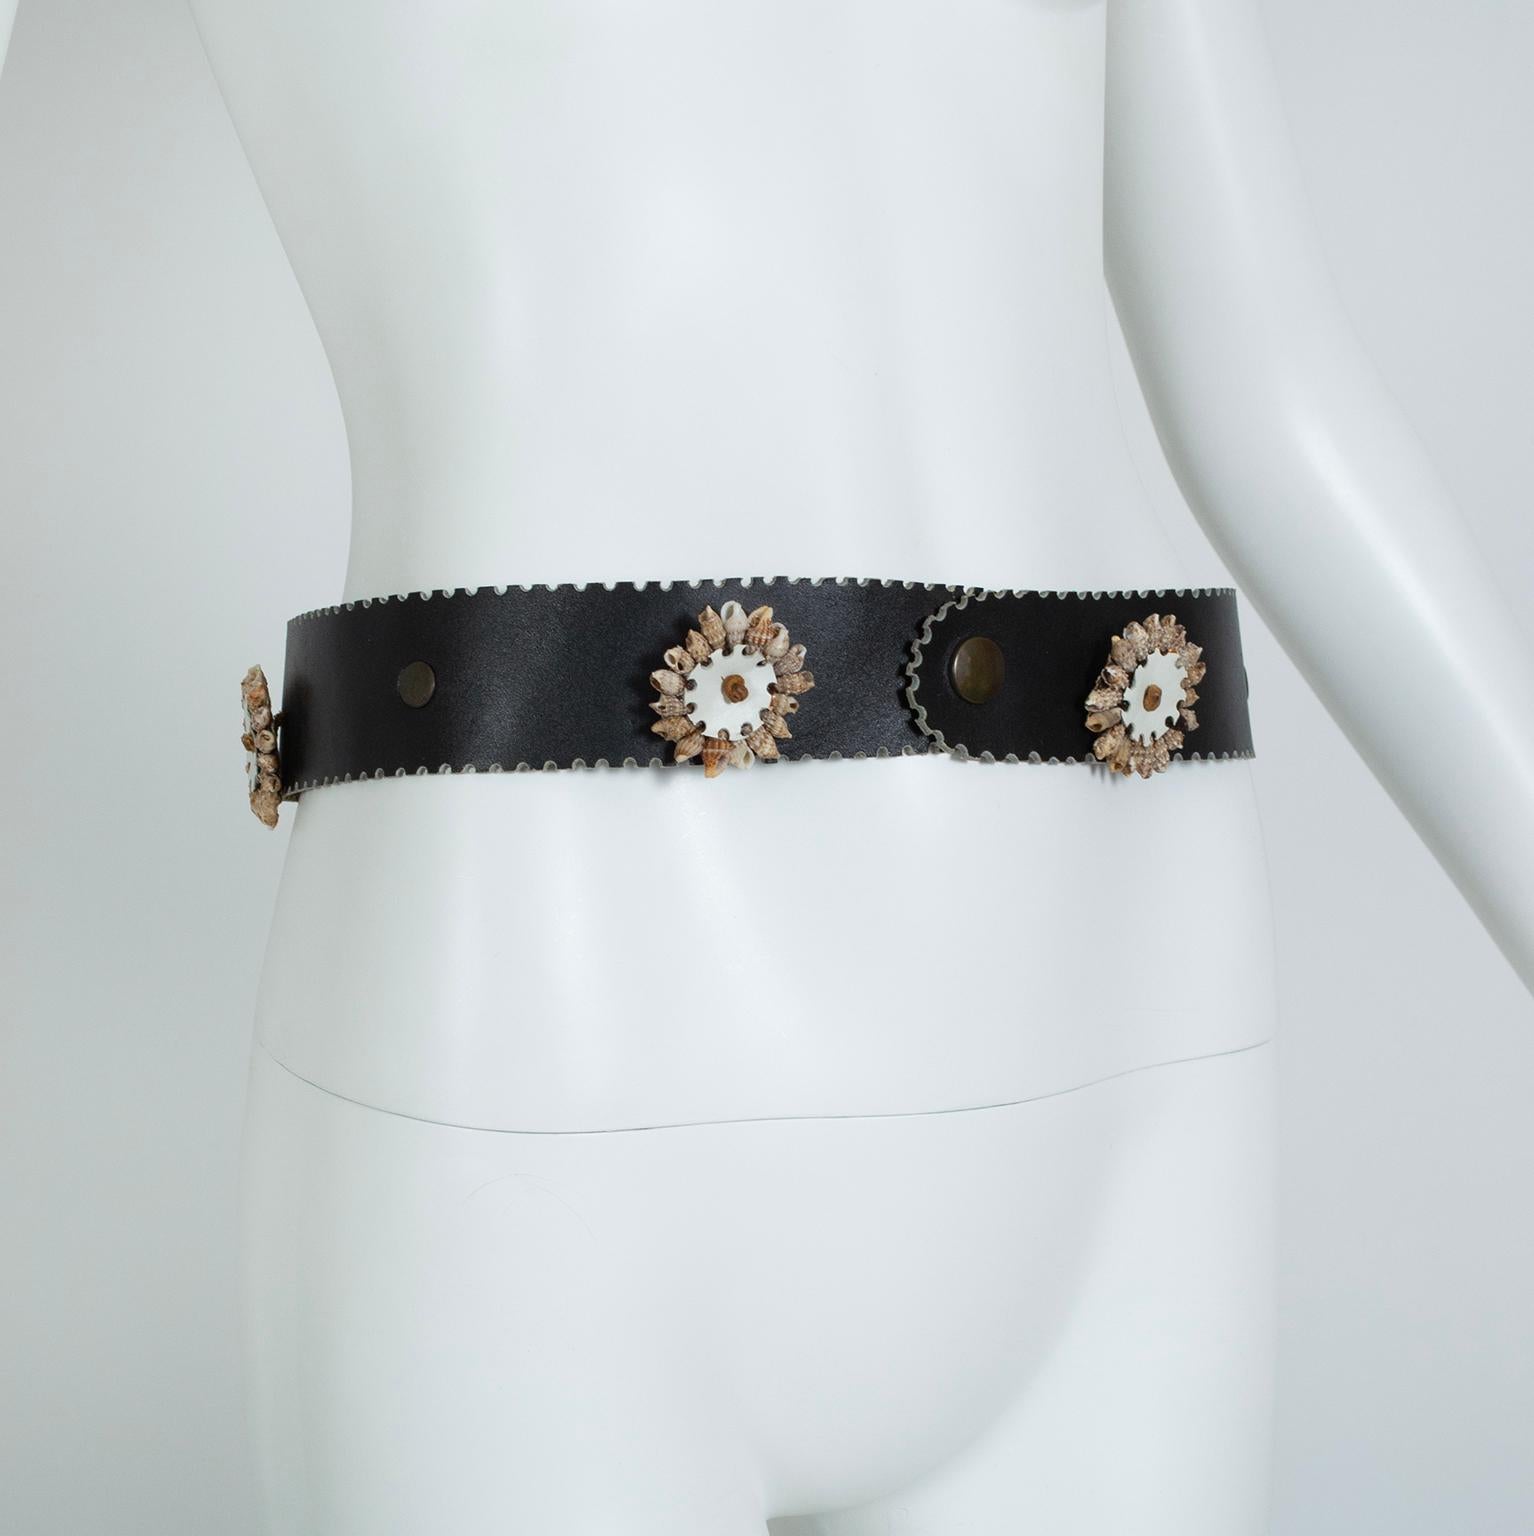 The perfect accompaniment to a breezy summer ensemble, this seashell motif belt adds a bit of bohemian whimsy to a bathing suit, pareo, kaftan or tunic. Just add sand.

Wide black-brown leather belt with laser cut castellated edges; 2” diameter